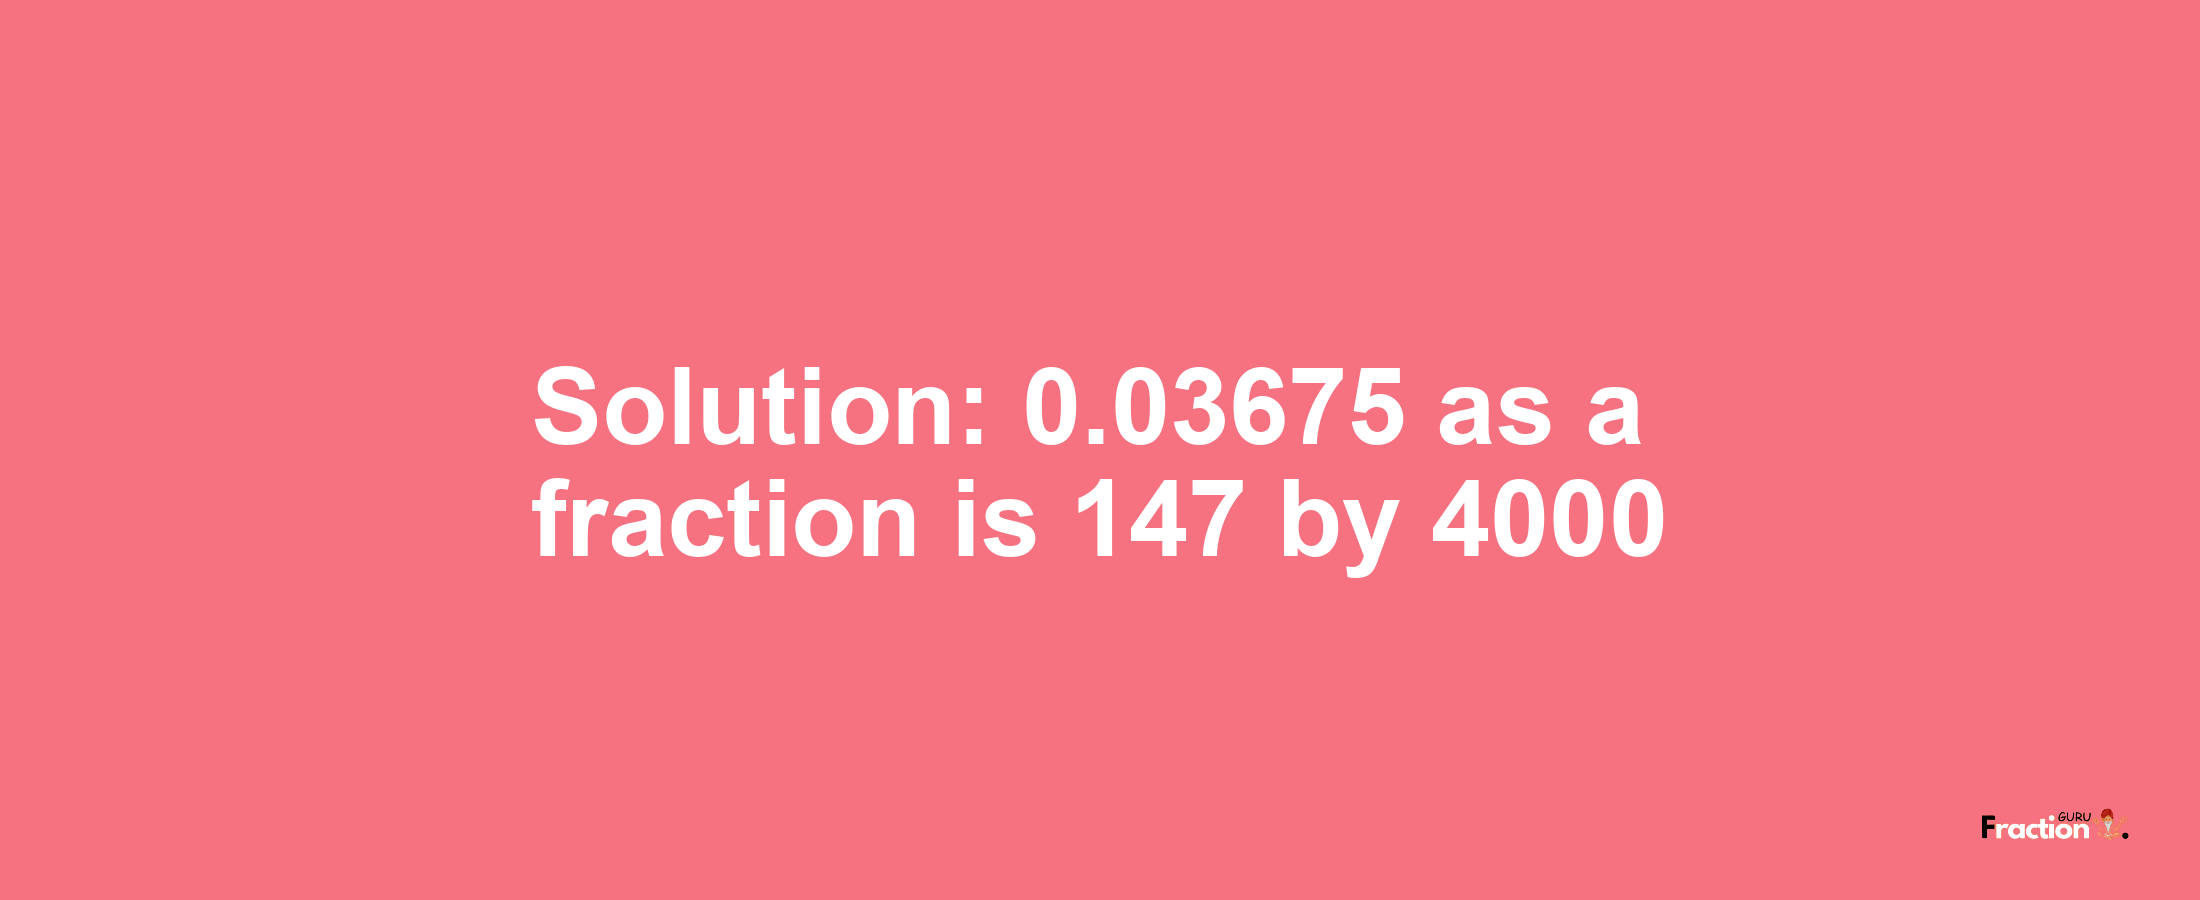 Solution:0.03675 as a fraction is 147/4000